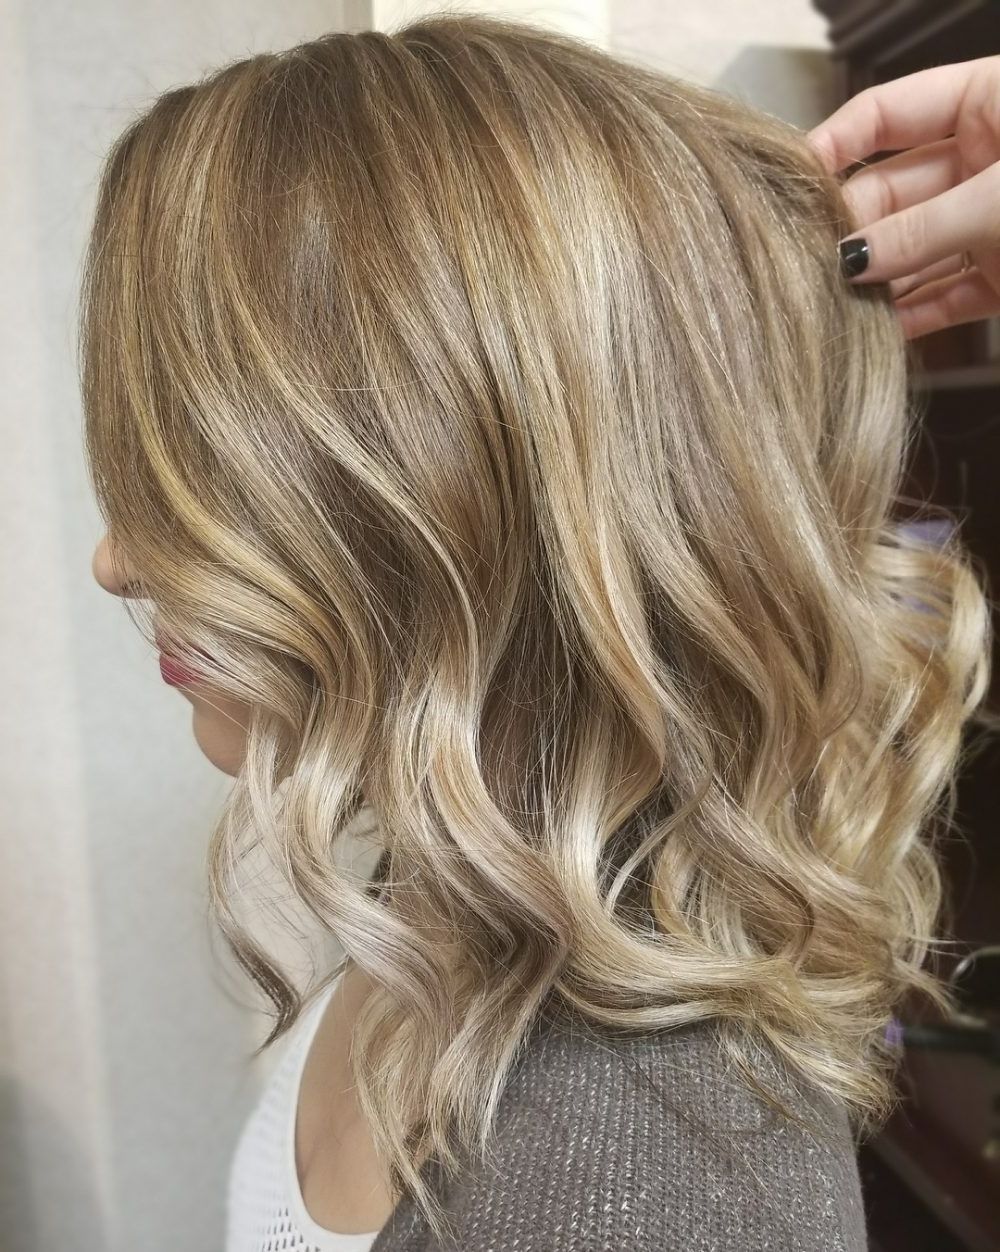 21 Hottest Honey Blonde Hair Color Ideas Of 2018 Throughout Current Multi Tonal Golden Bob Blonde Hairstyles (View 20 of 20)